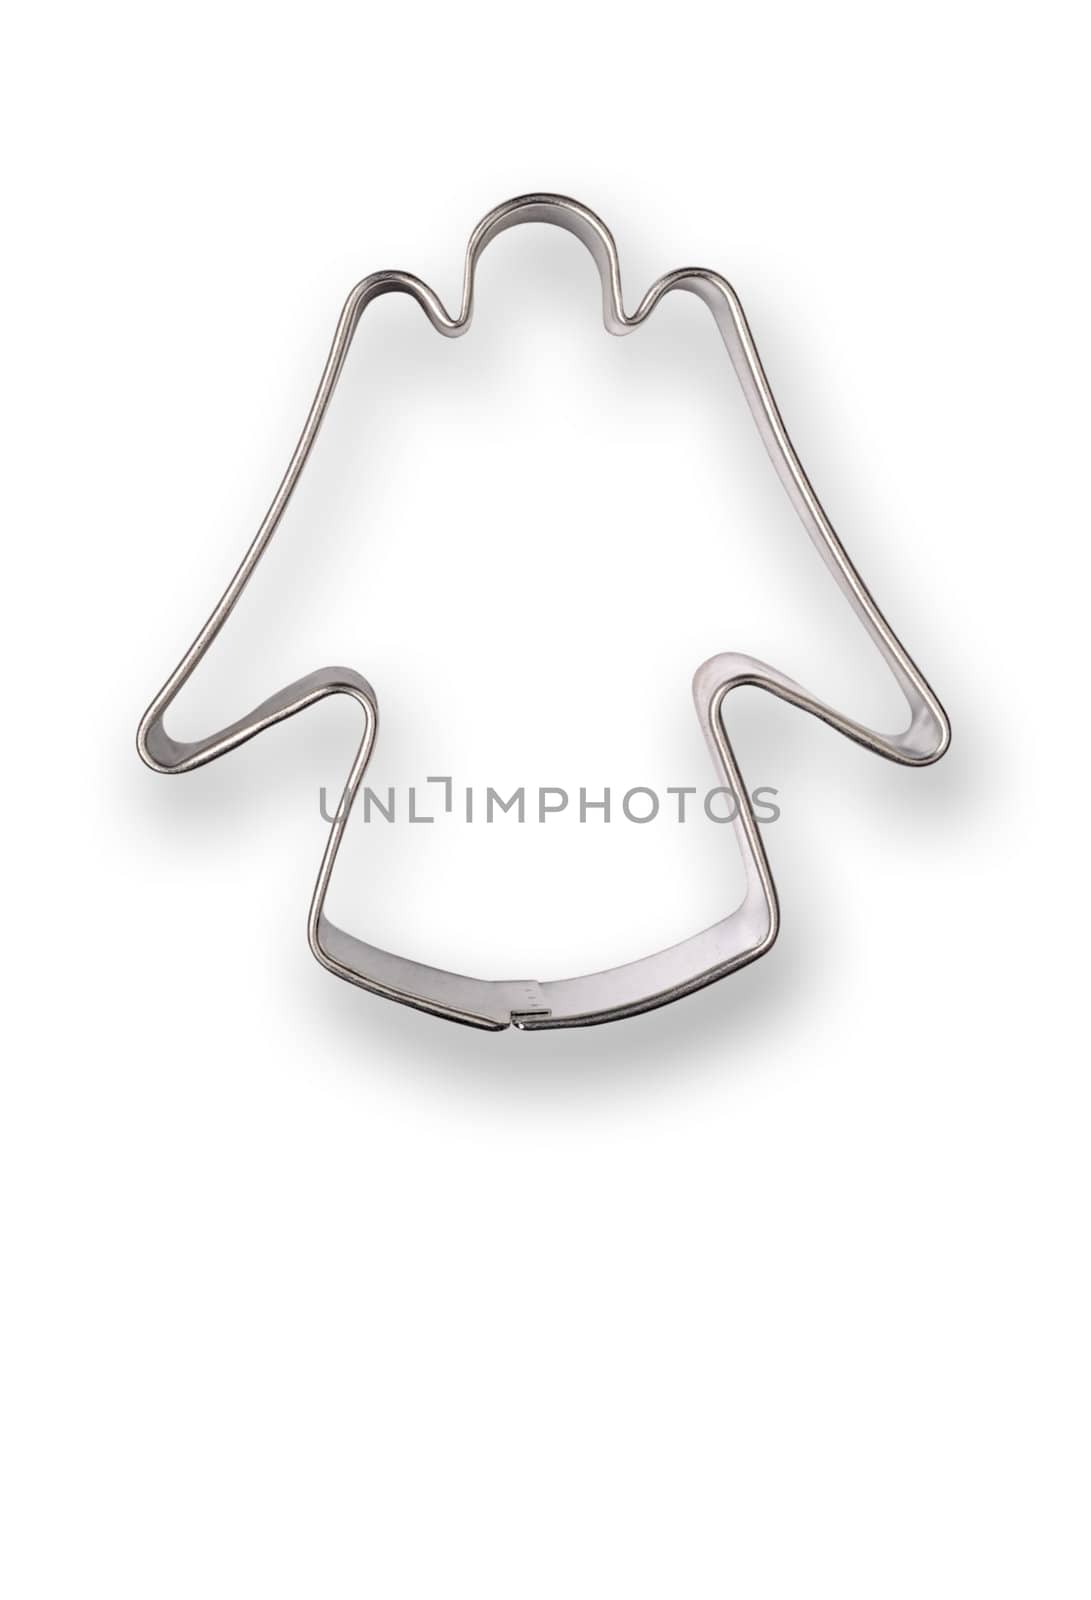 Angel shaped cookie cutter with clipping path